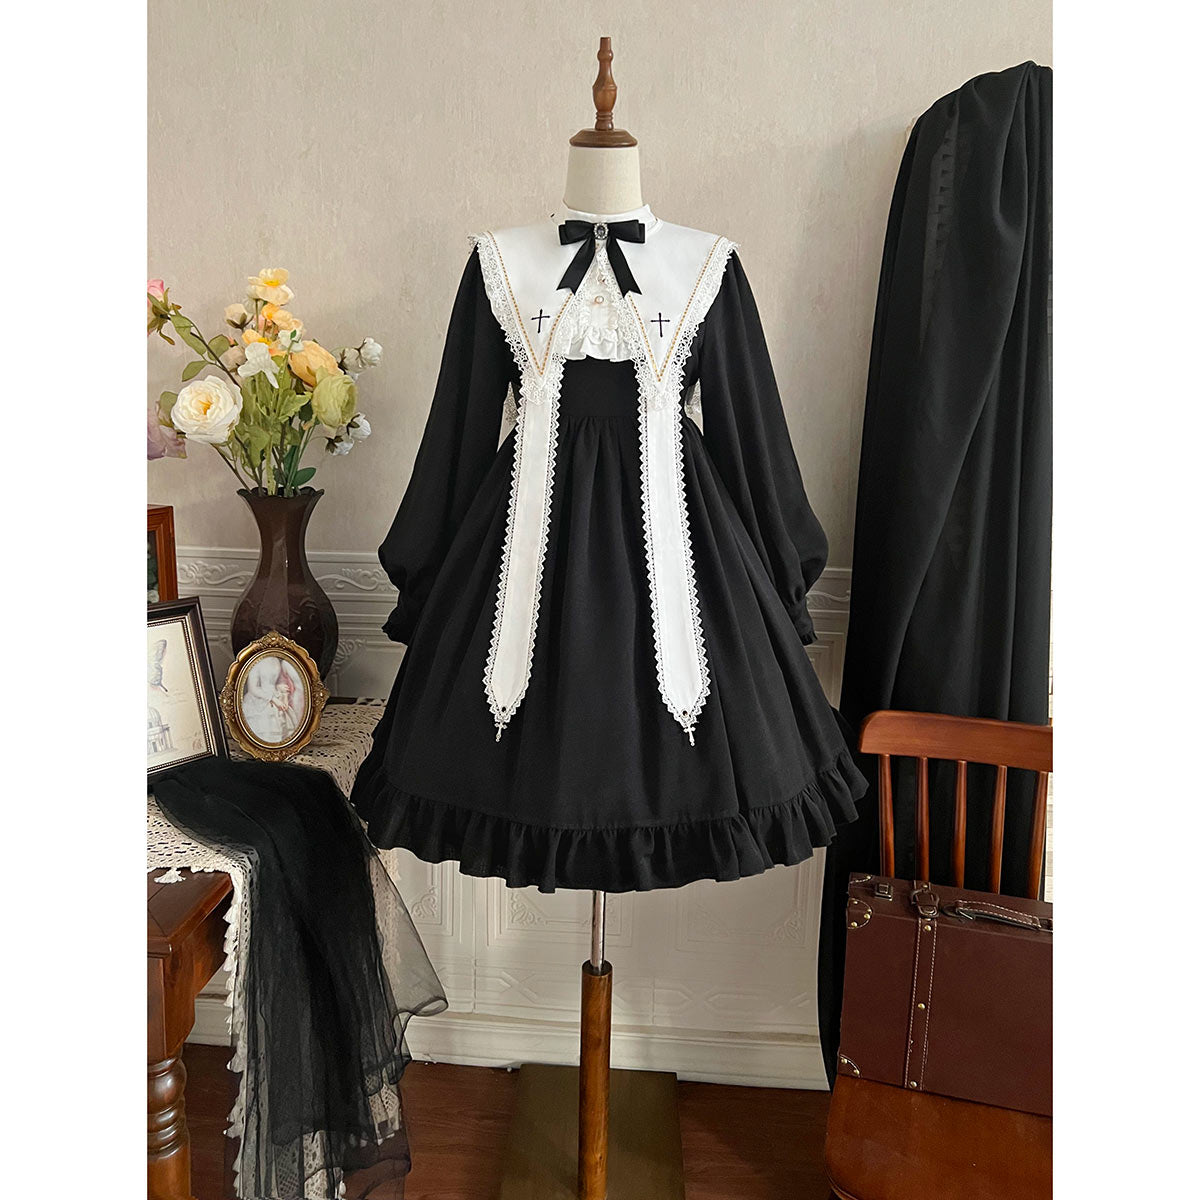 Cross Contract Sister style long sleeve dress with attached collar